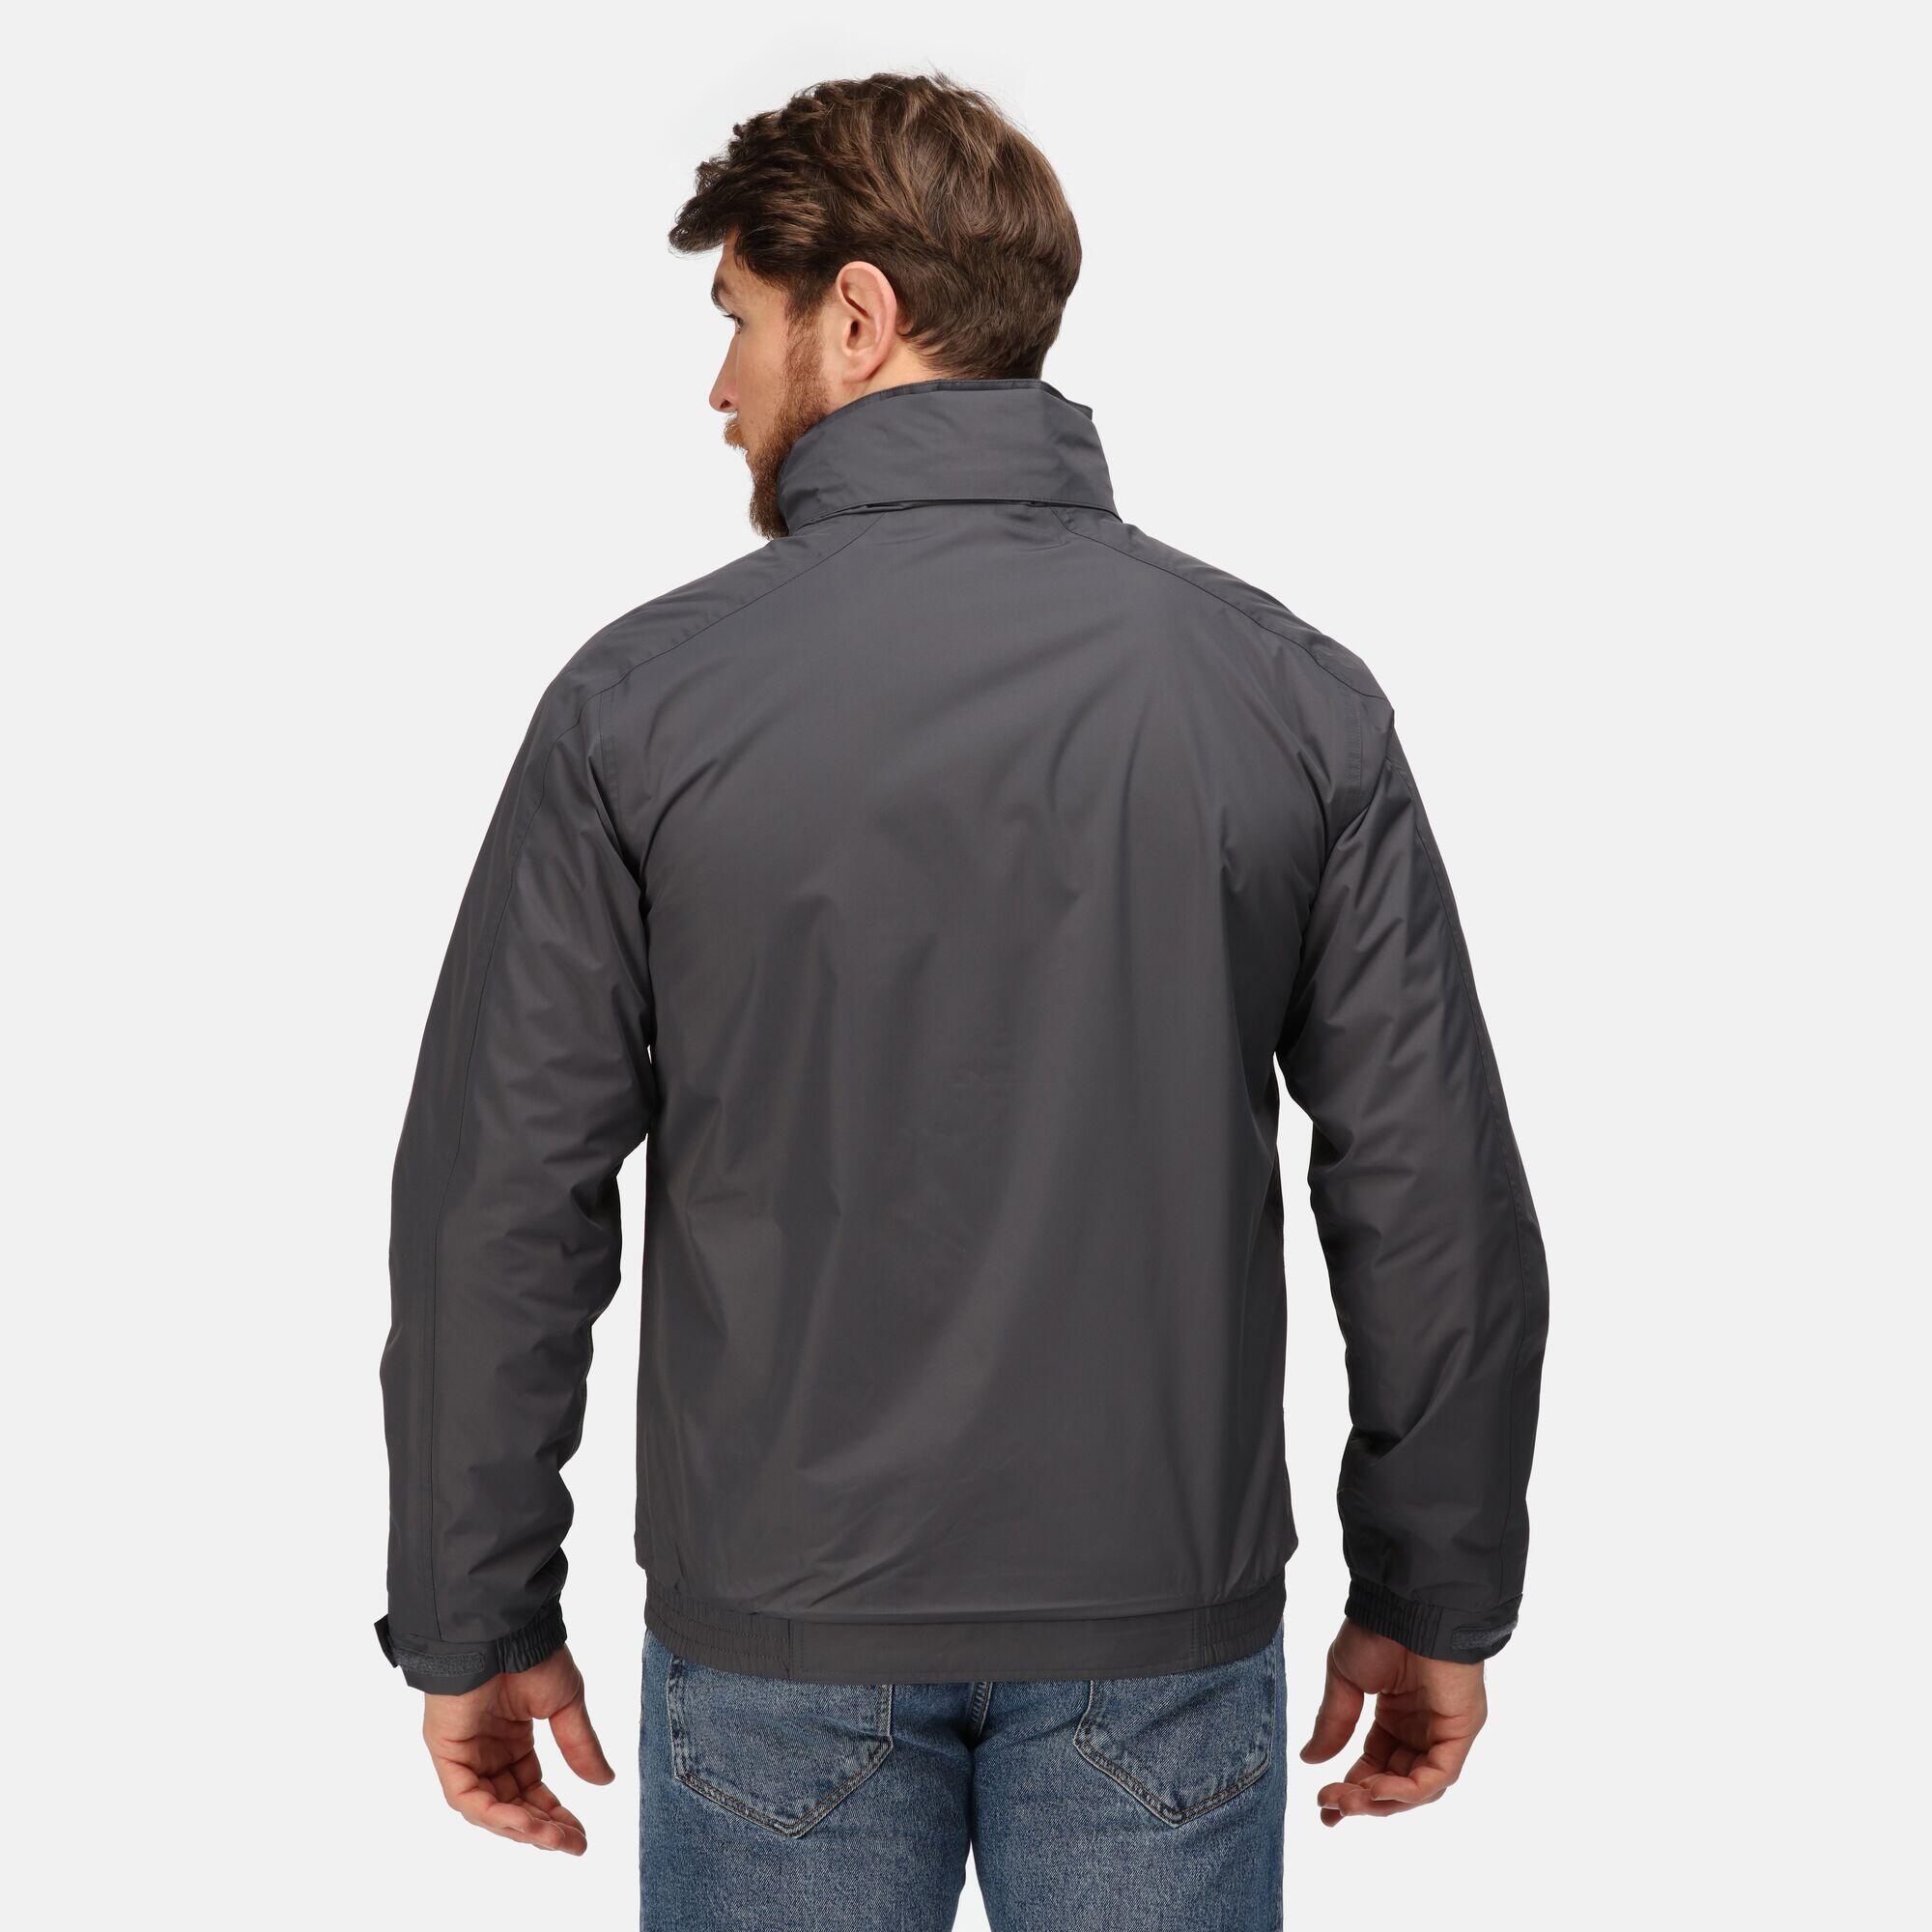 Dover Waterproof Windproof Jacket (ThermoGuard Insulation) (Seal Grey/Black) 2/5